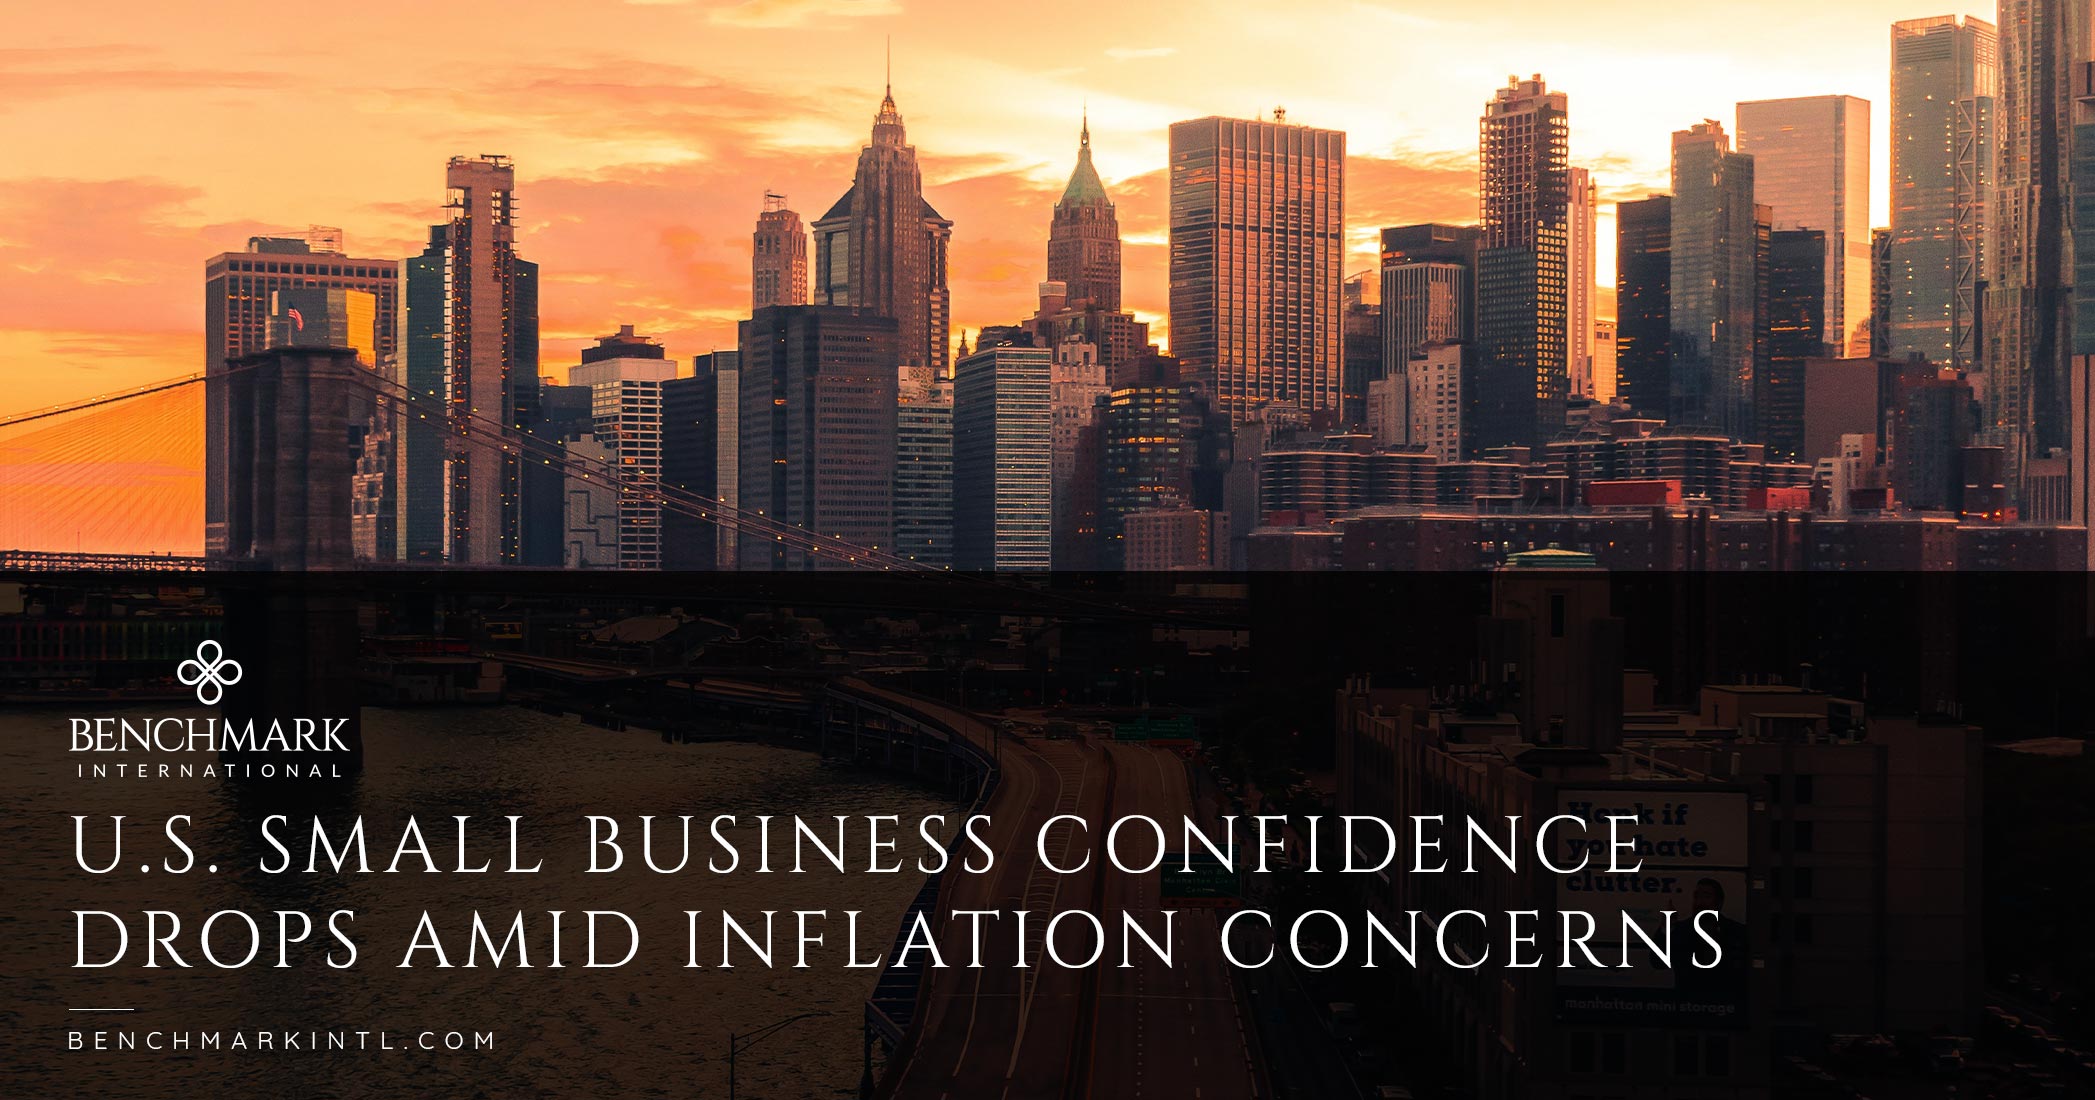 U.S. Small Business Confidence Drops Amid Inflation Concerns